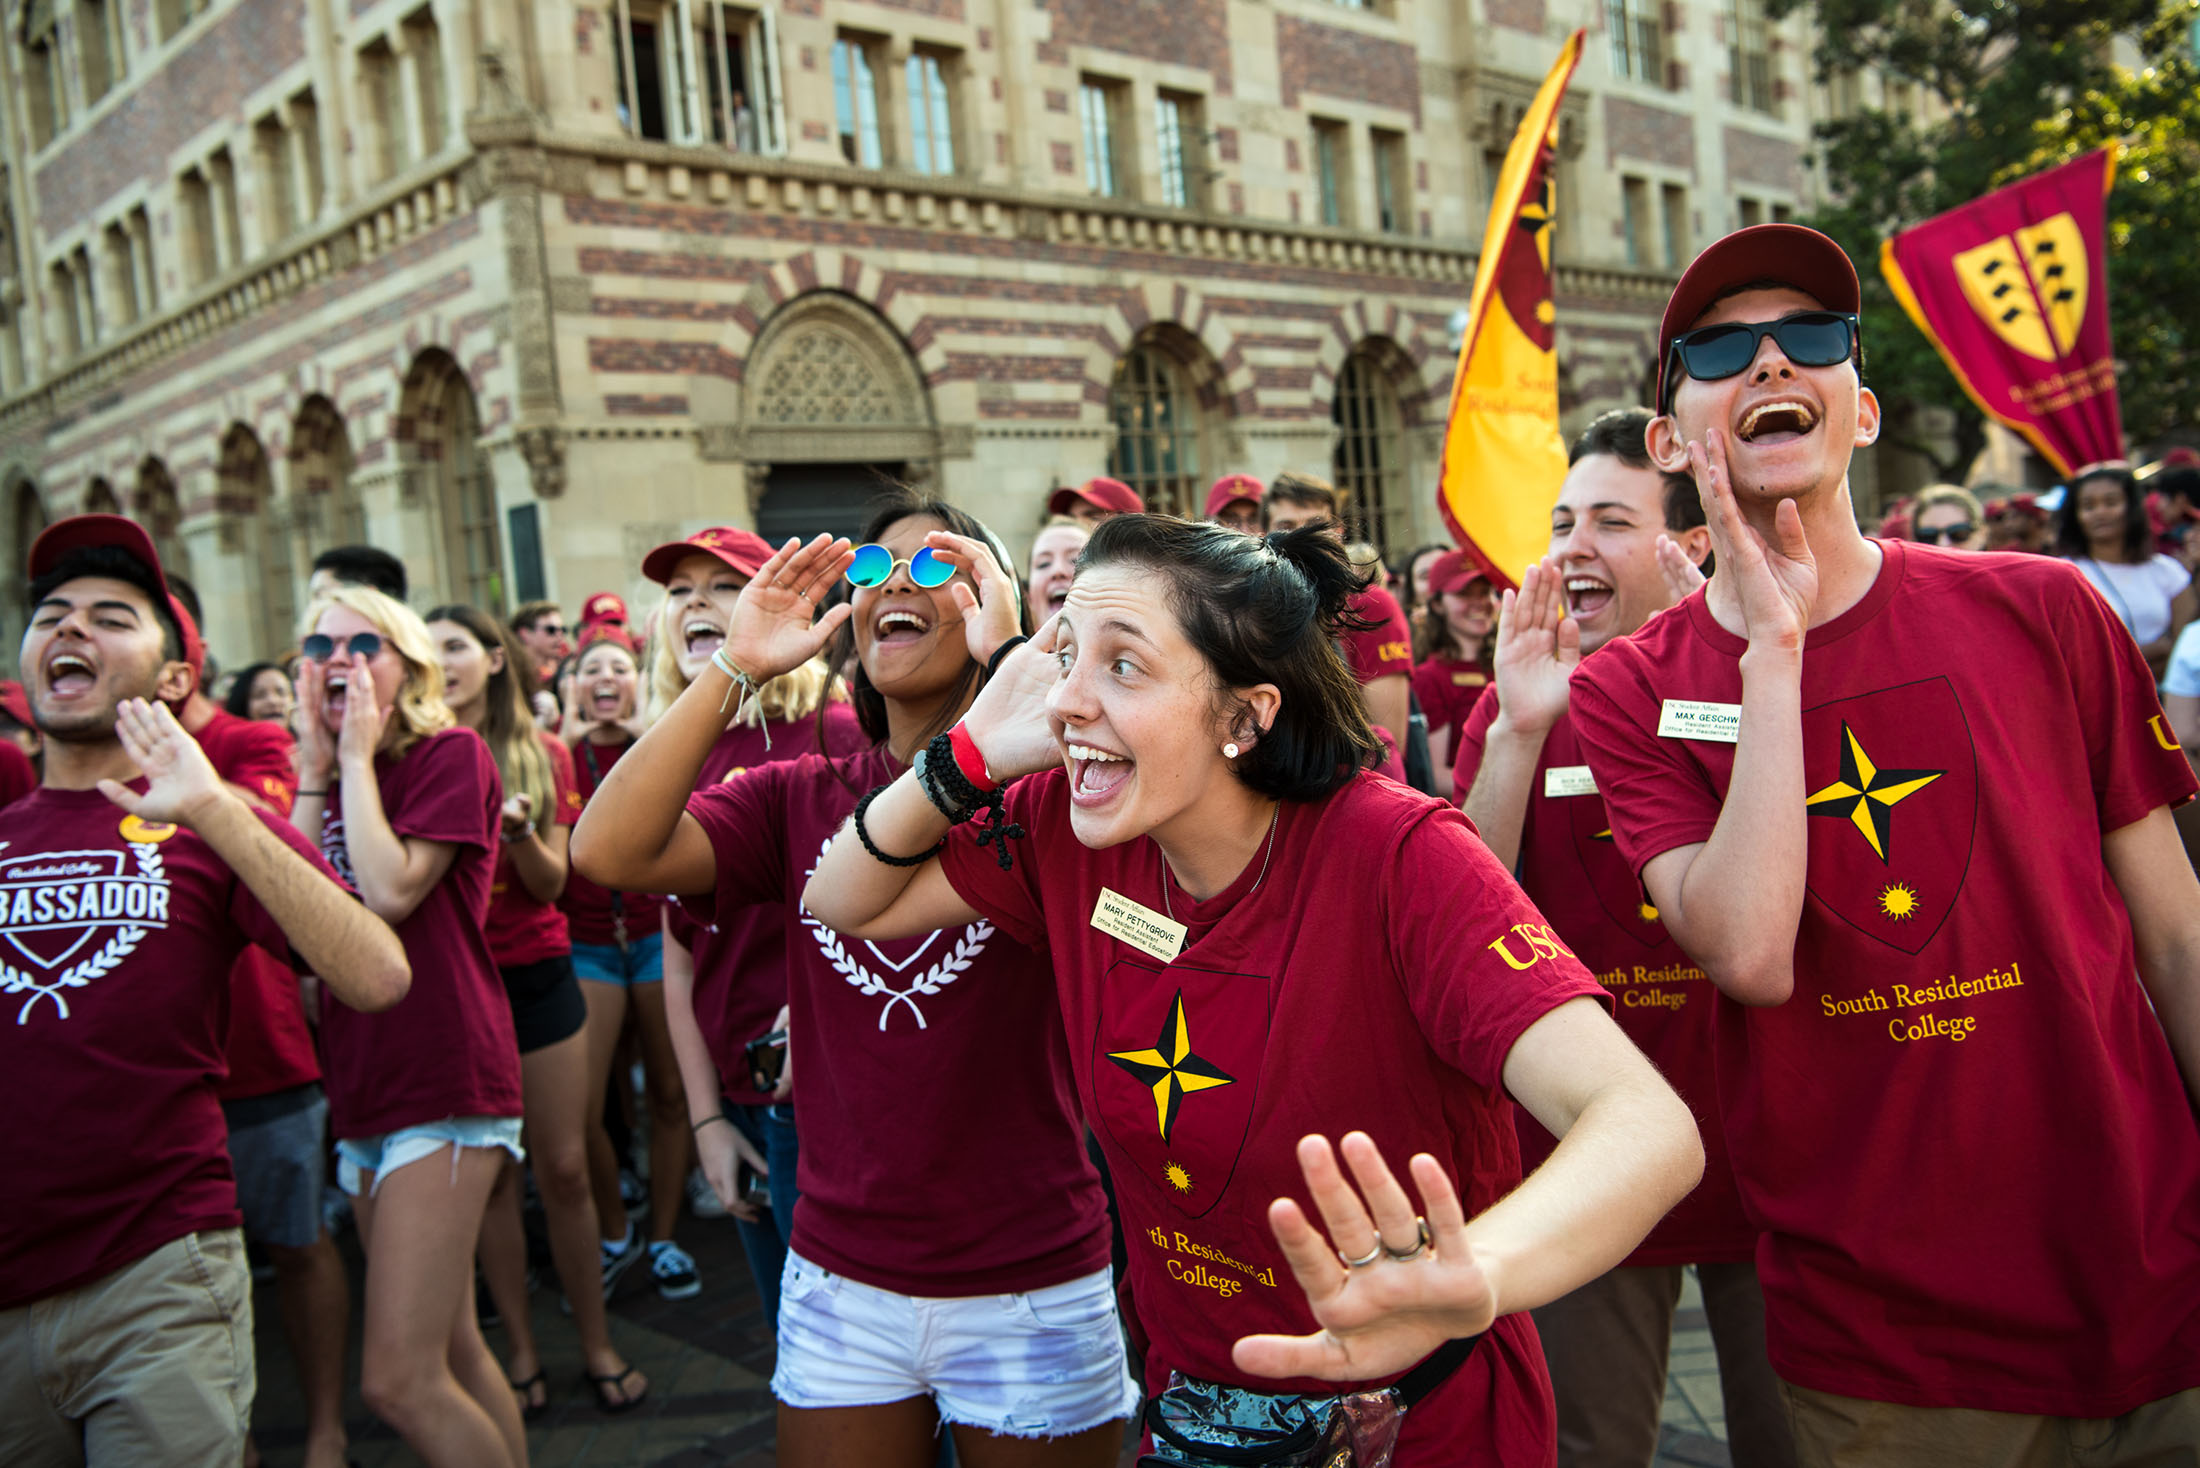 Students from South Residential College yell a cheer at the Residential College Spirit Rally at USC, Friday, August 18, 2017. (USC Photo / Michael Owen Baker)